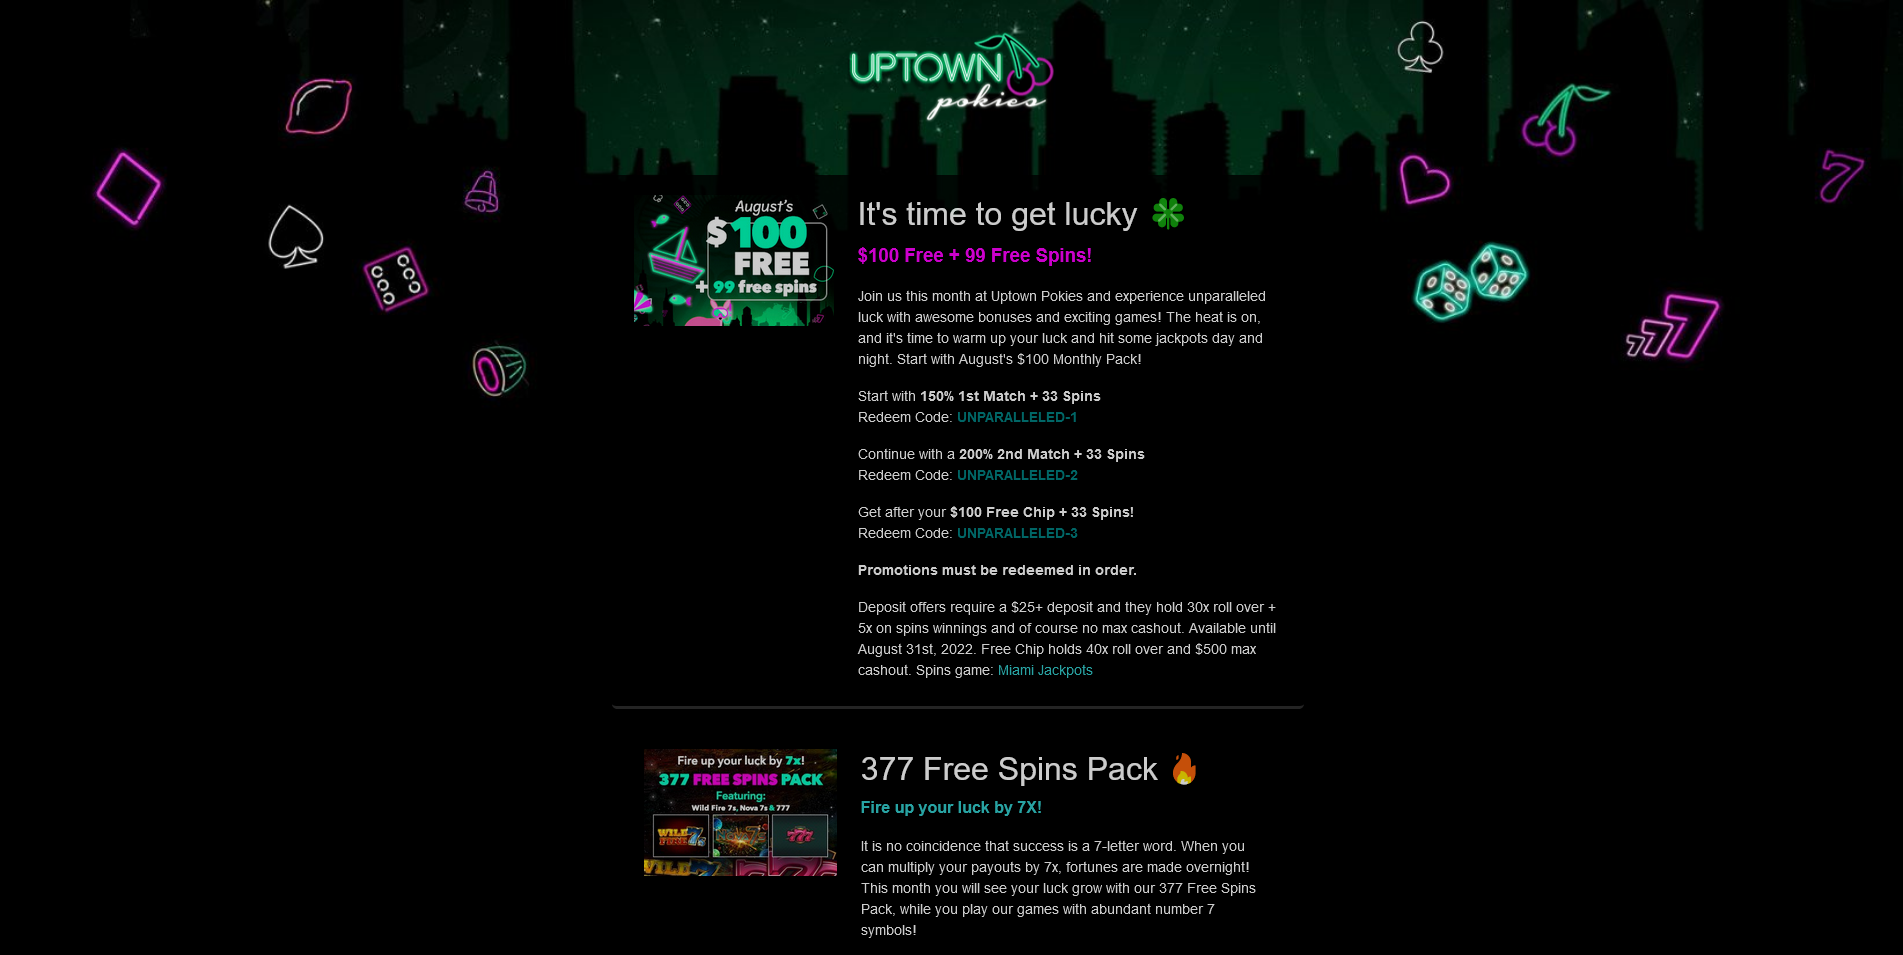 Screenshot of Promotions Page on Uptown Pokies Casino site